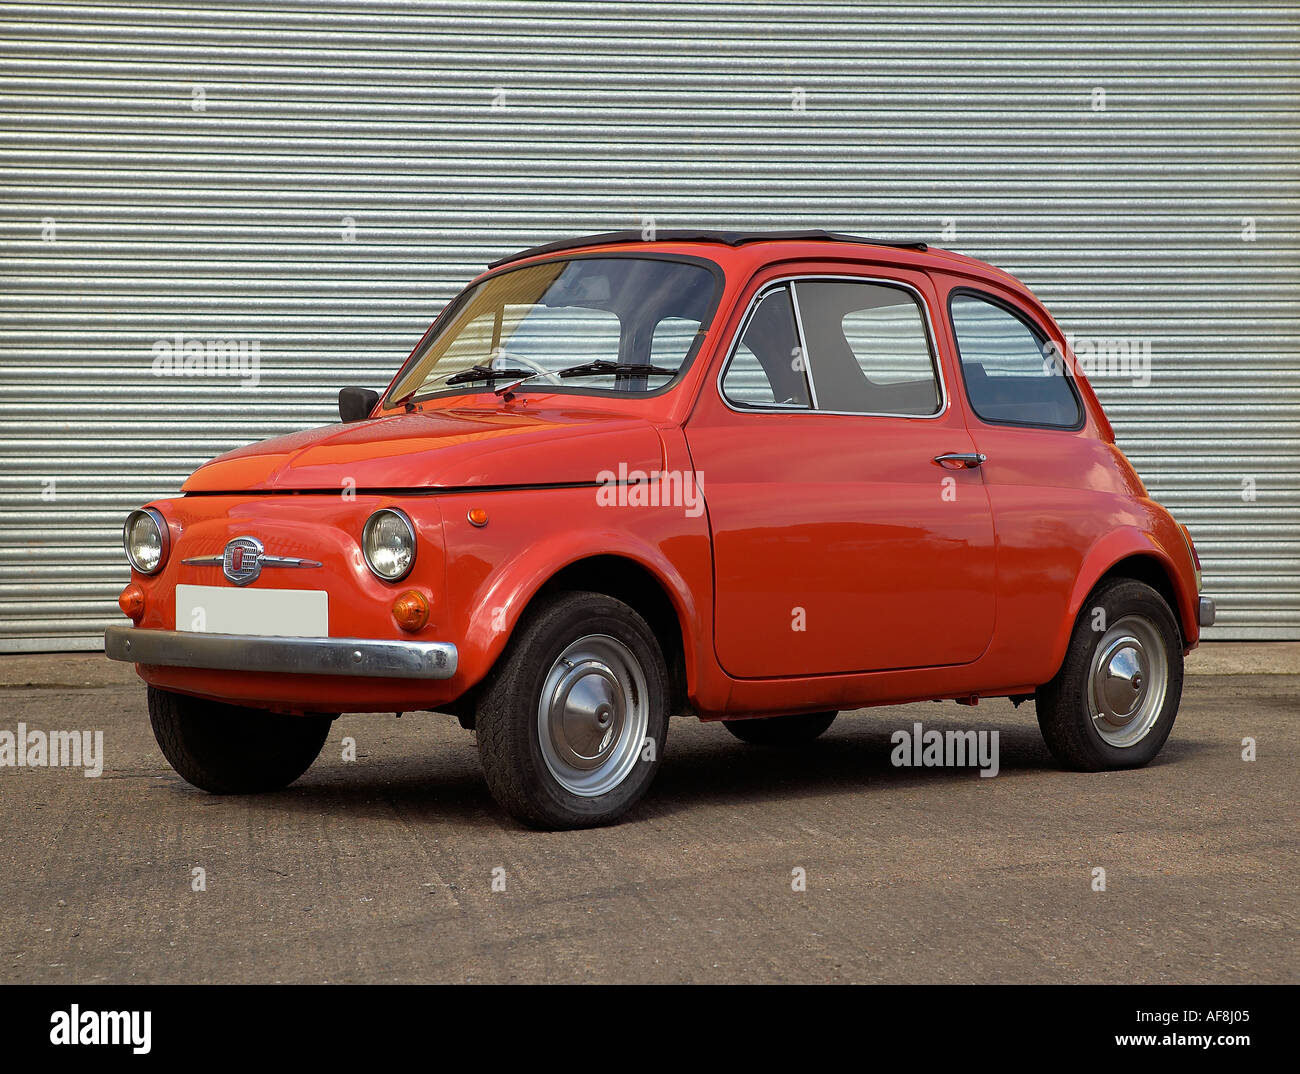 1972 Fiat 500 twin cylinder 499cc 22bhp at 4600rpm Original design by Dante Giacosa Country of origin Italy Stock Photo